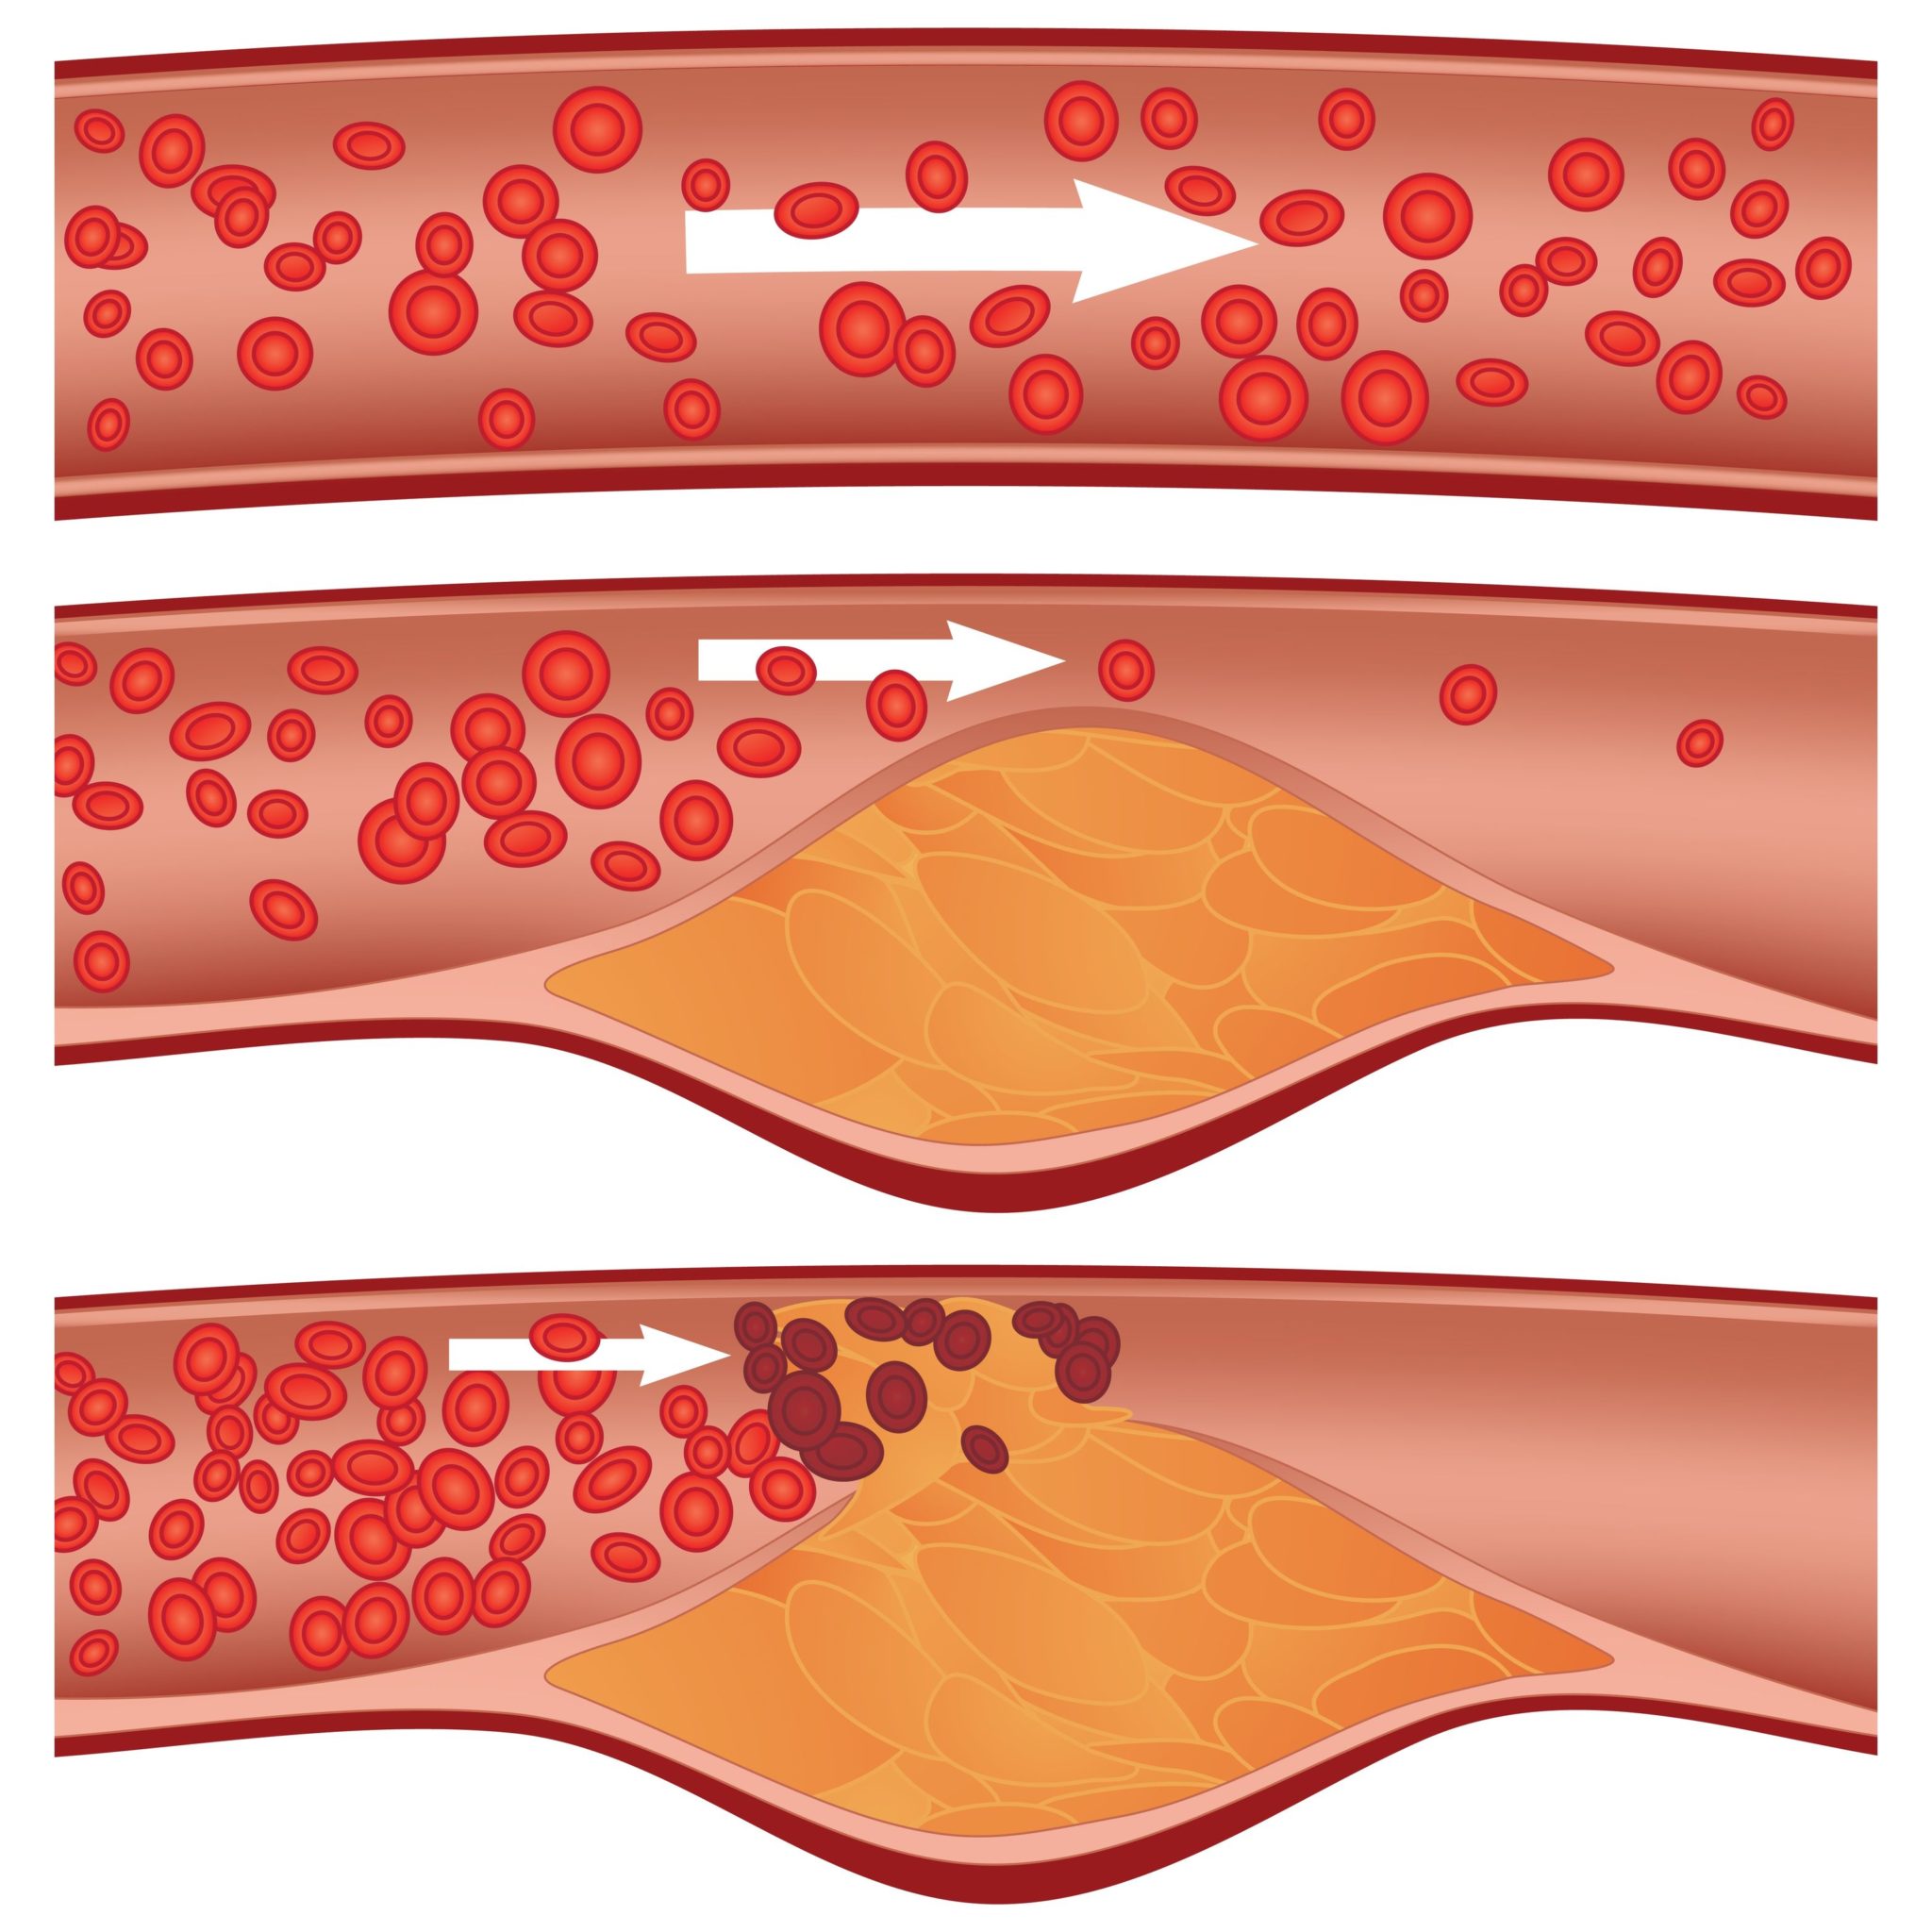 Atherosclerosis - Clogged Arteries